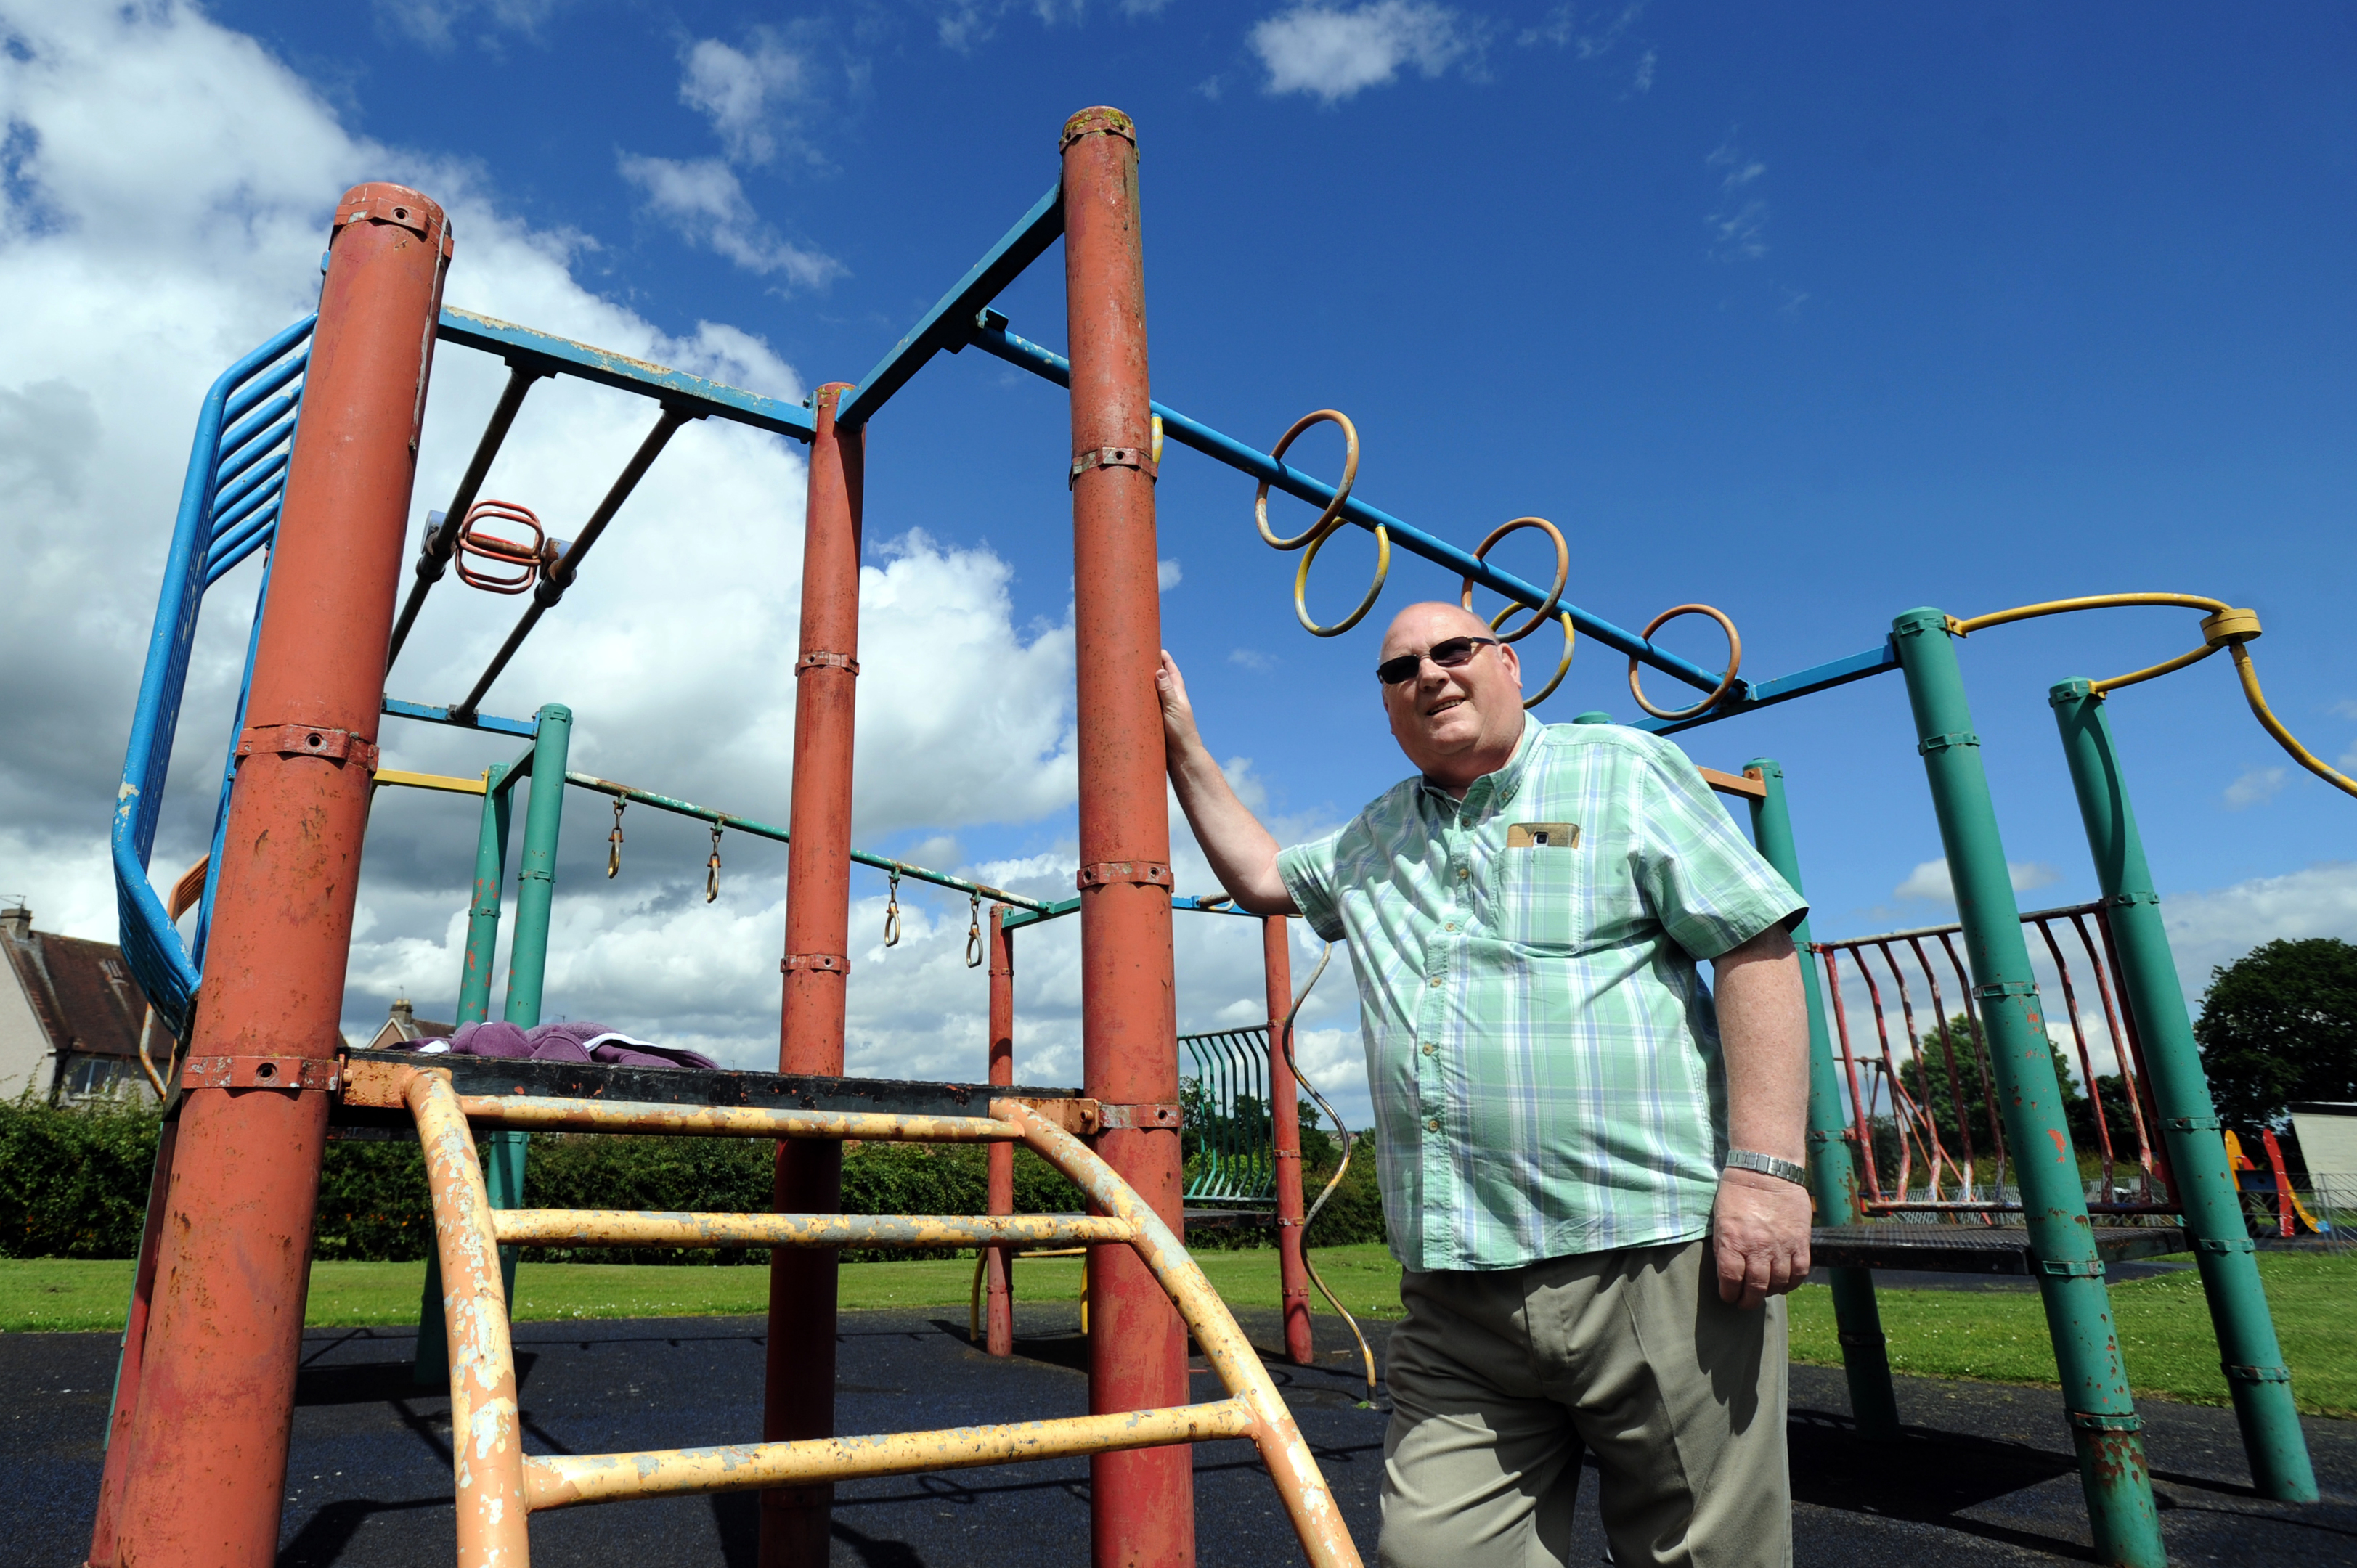 Mick Green at the climbing frame in Carleton Park, Glenrothes.